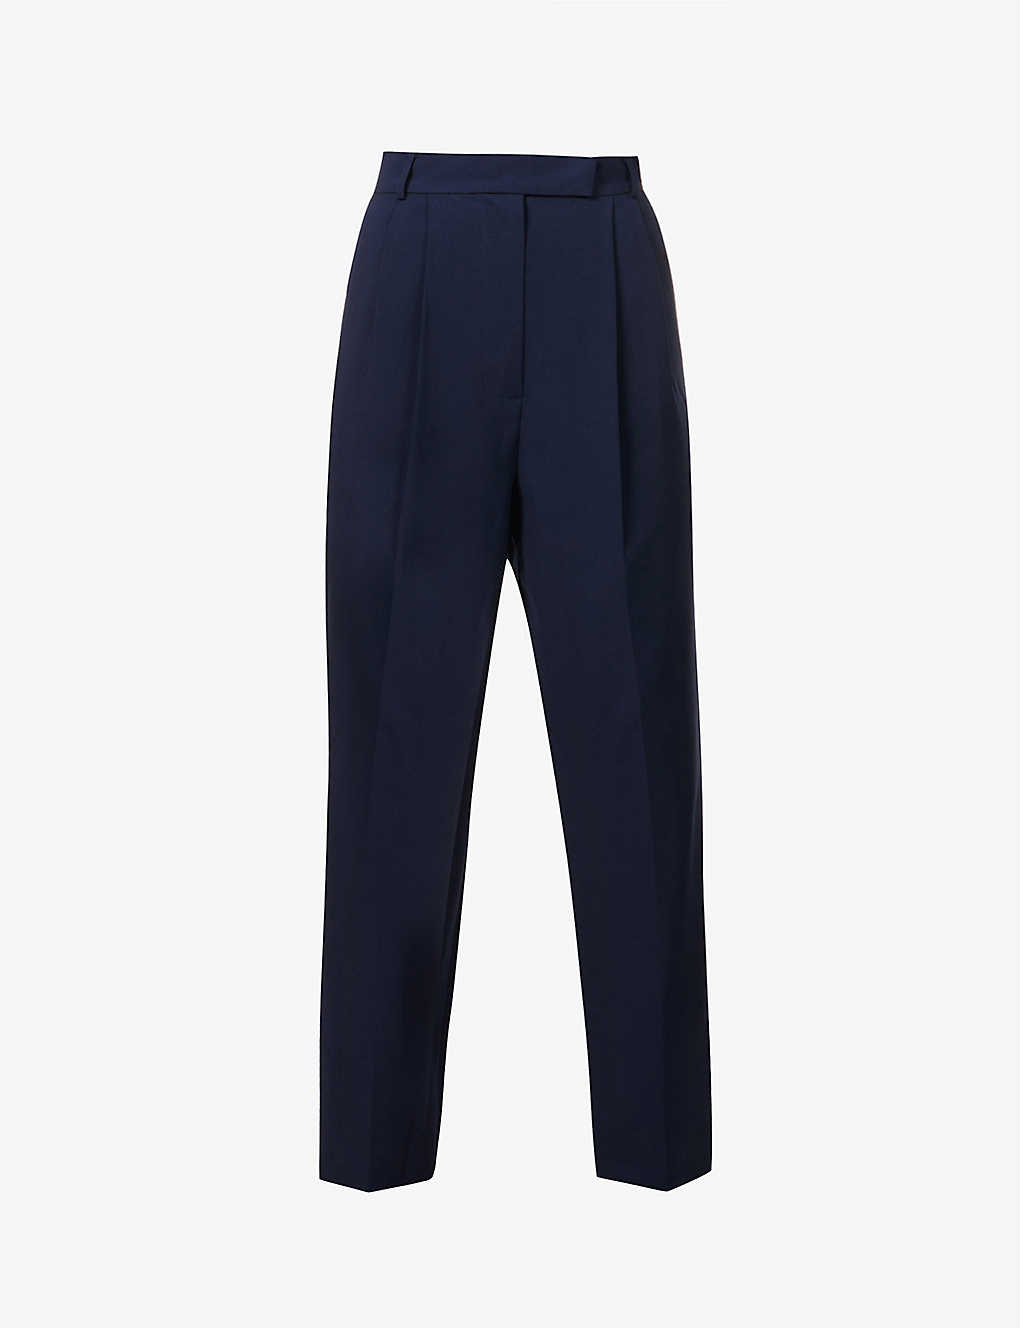 Shop The Frankie Shop Frankie Shop Women's Midnight Blue Bea Tapered-leg High-rise Stretch-woven Trousers